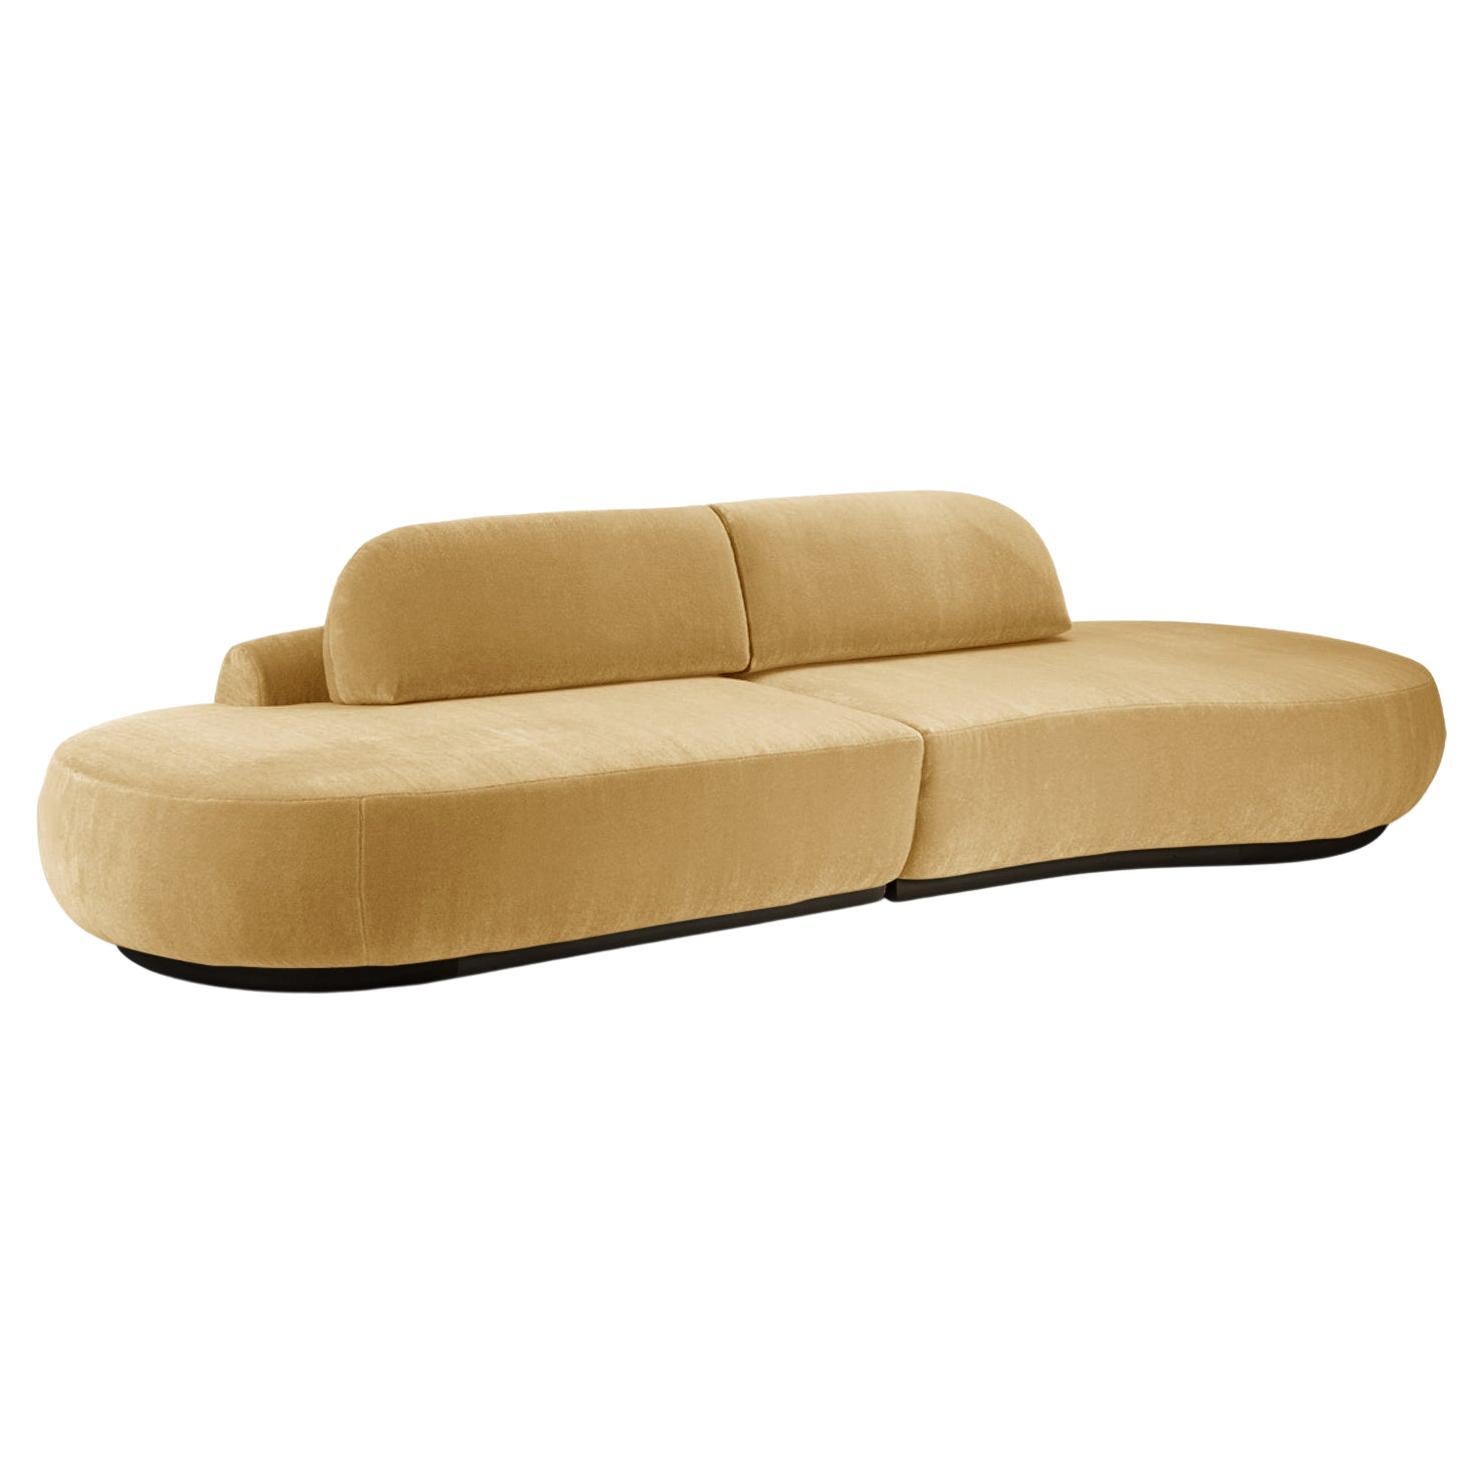 Naked Curved Sectional Sofa, 2 Piece with Beech Ash-056-5 and Vigo Plantain